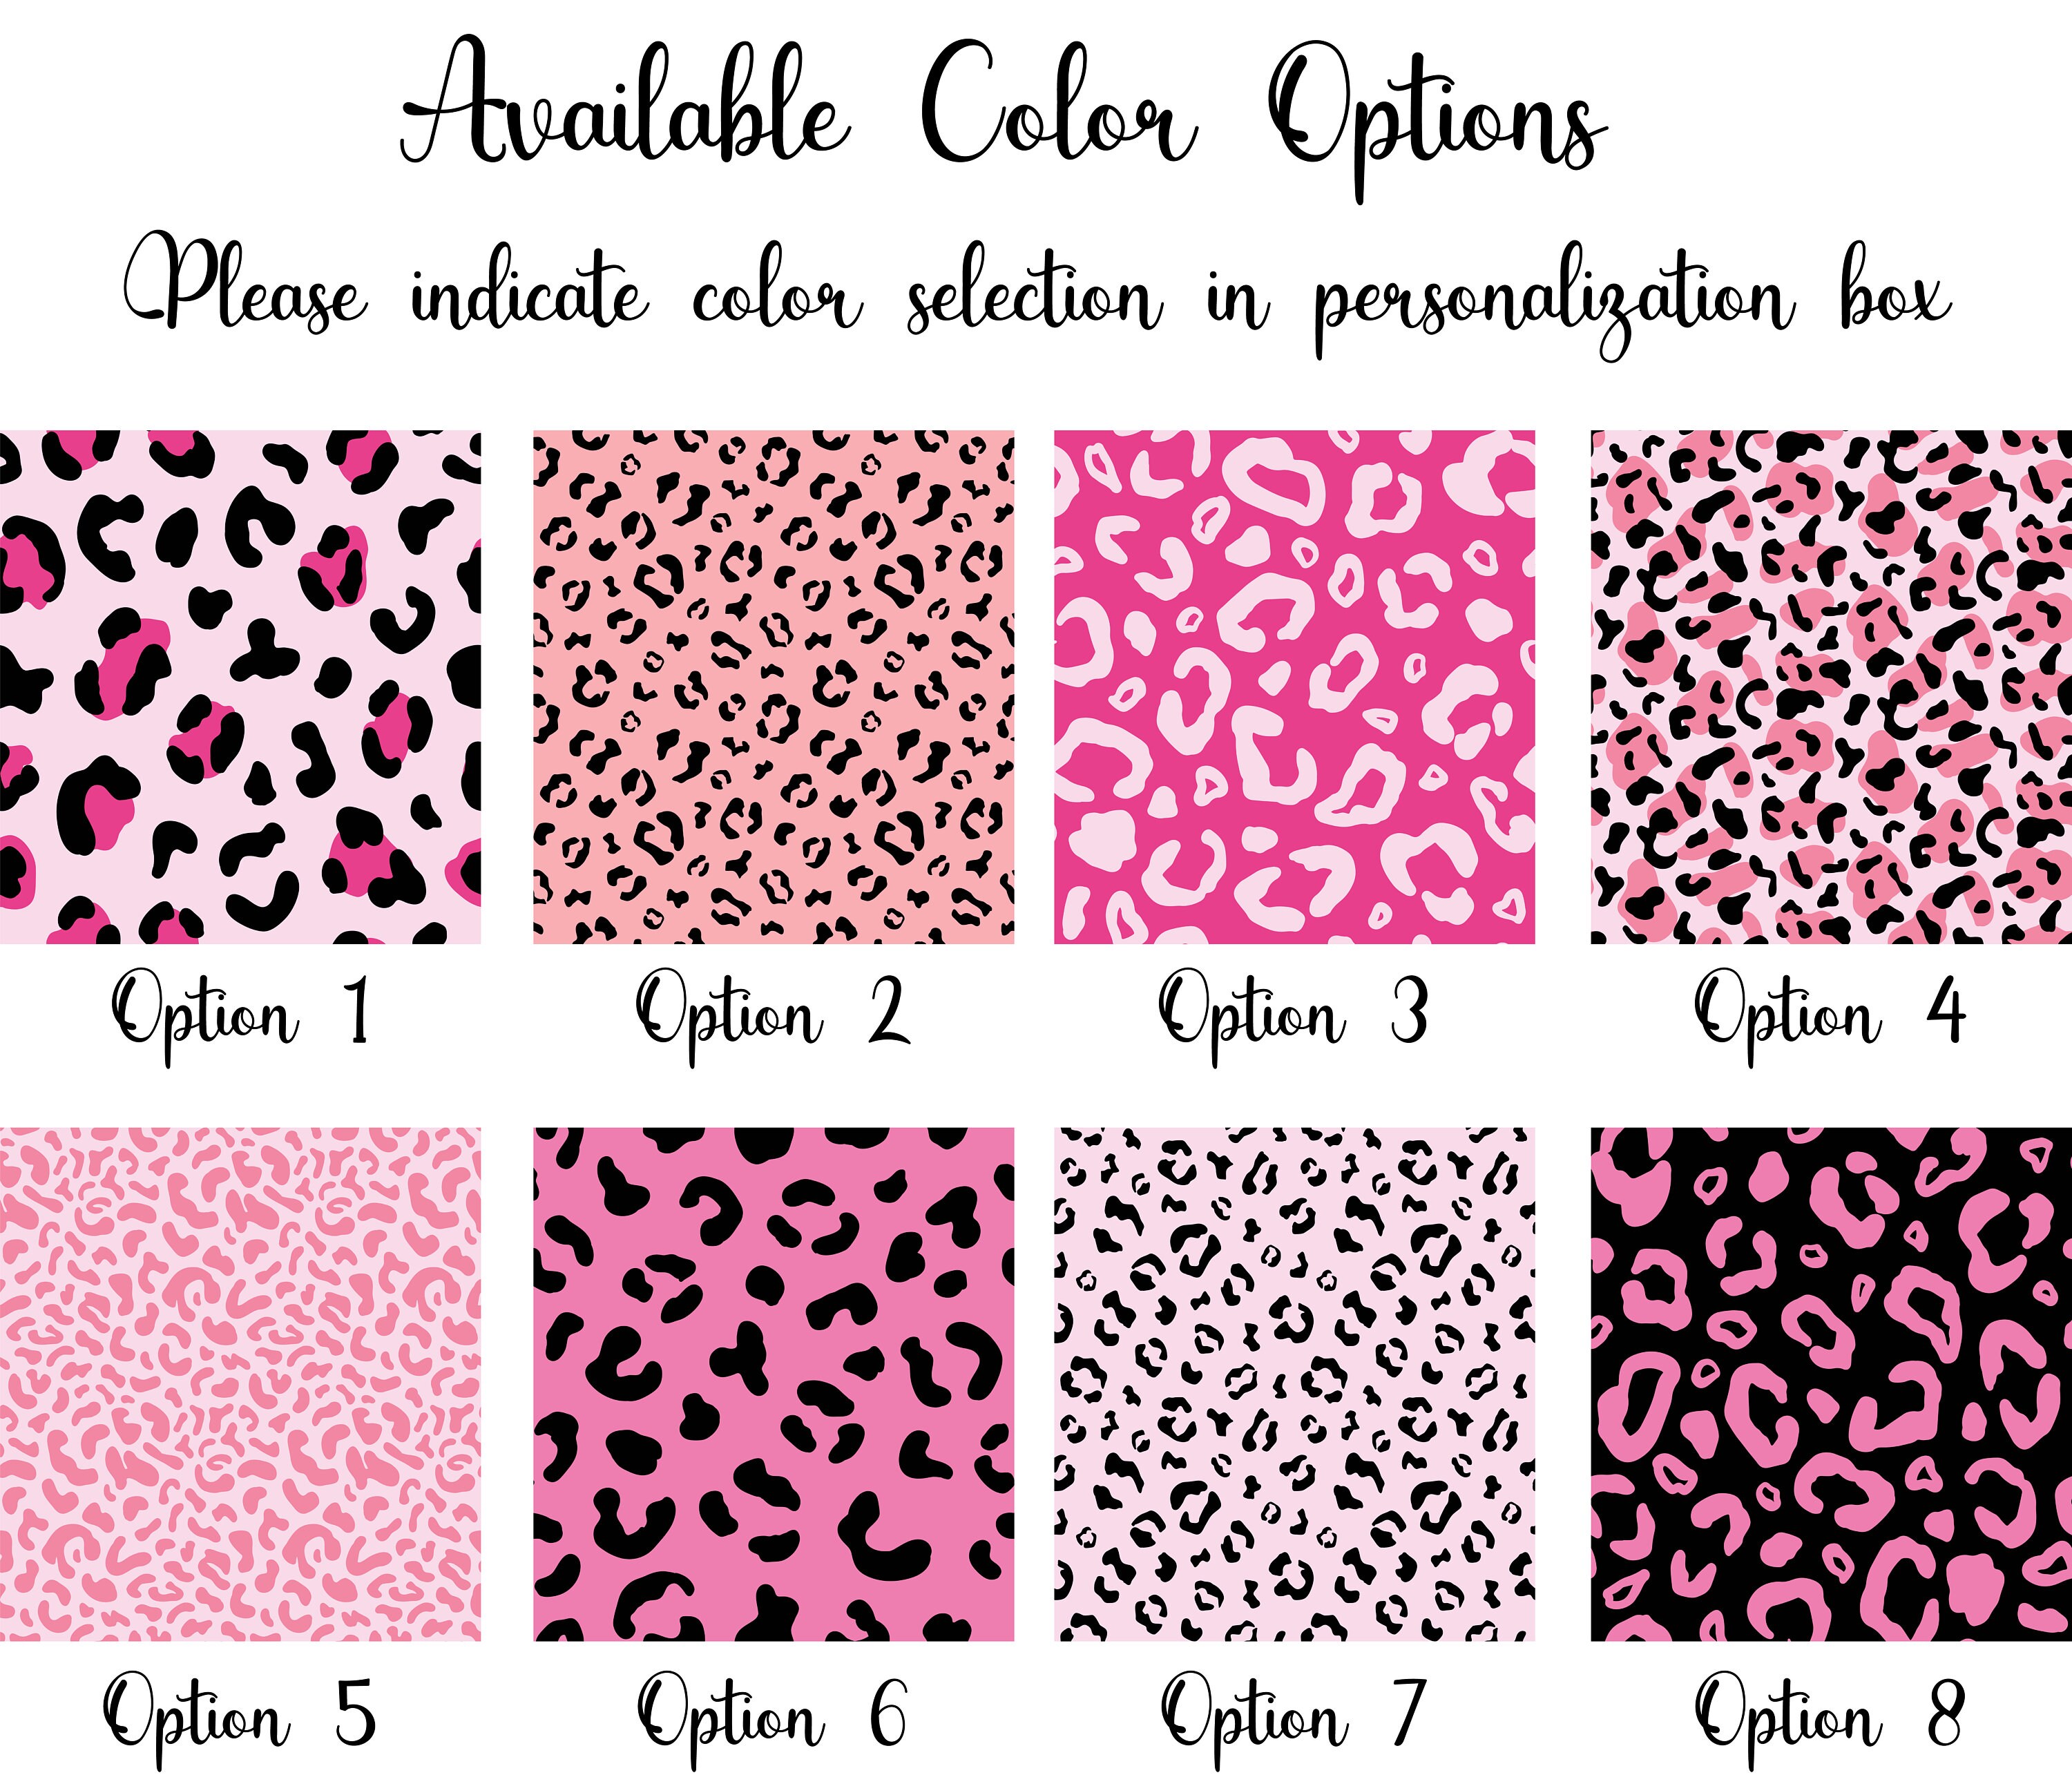 Discover Pink/Black Leopard Print Hooded Blanket | Cozy Home Wear